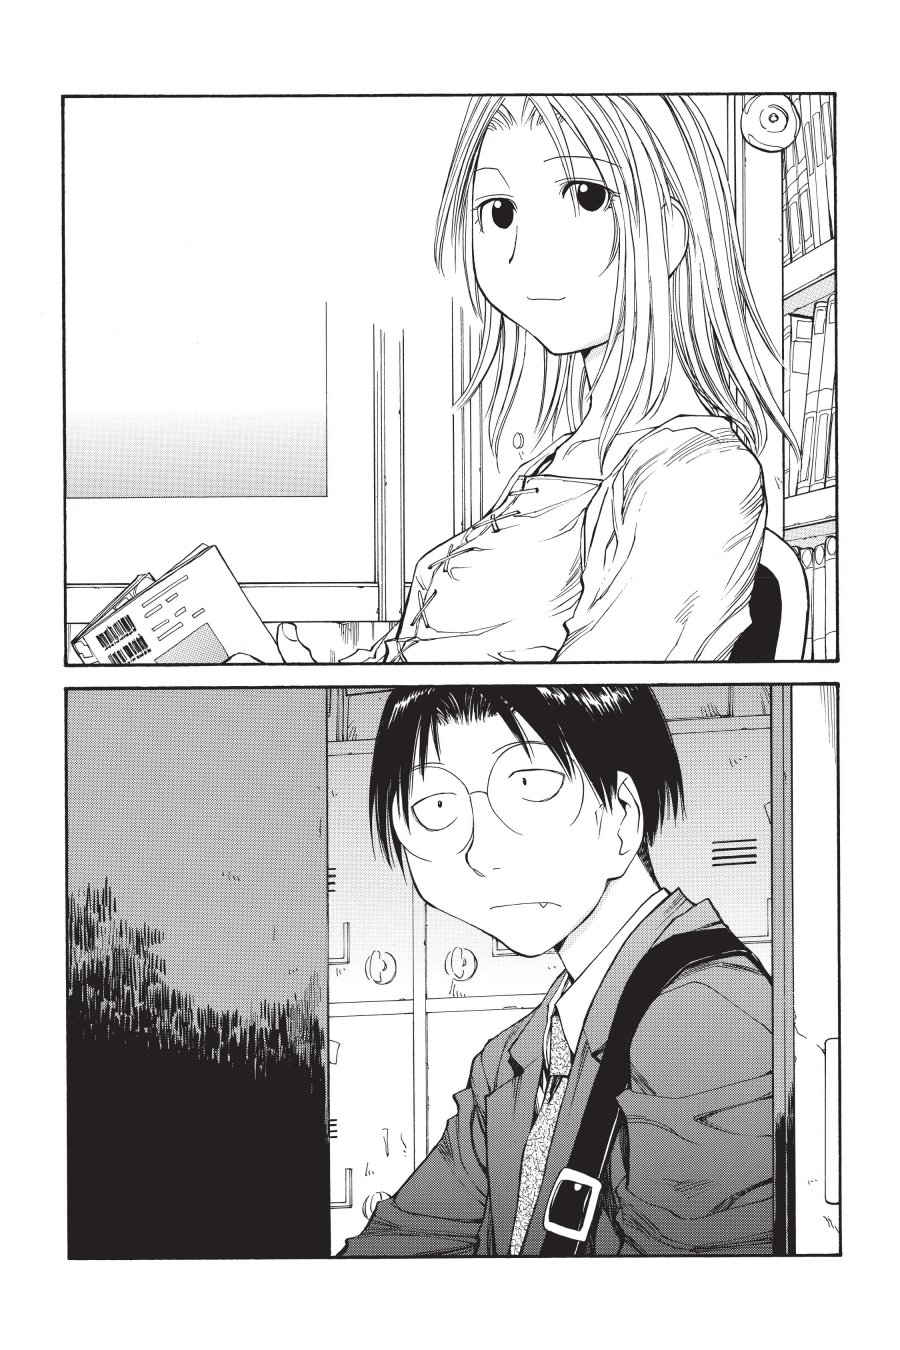 Genshiken – The Society for the Study of Modern Visual Culture Chapter 53 Image 2